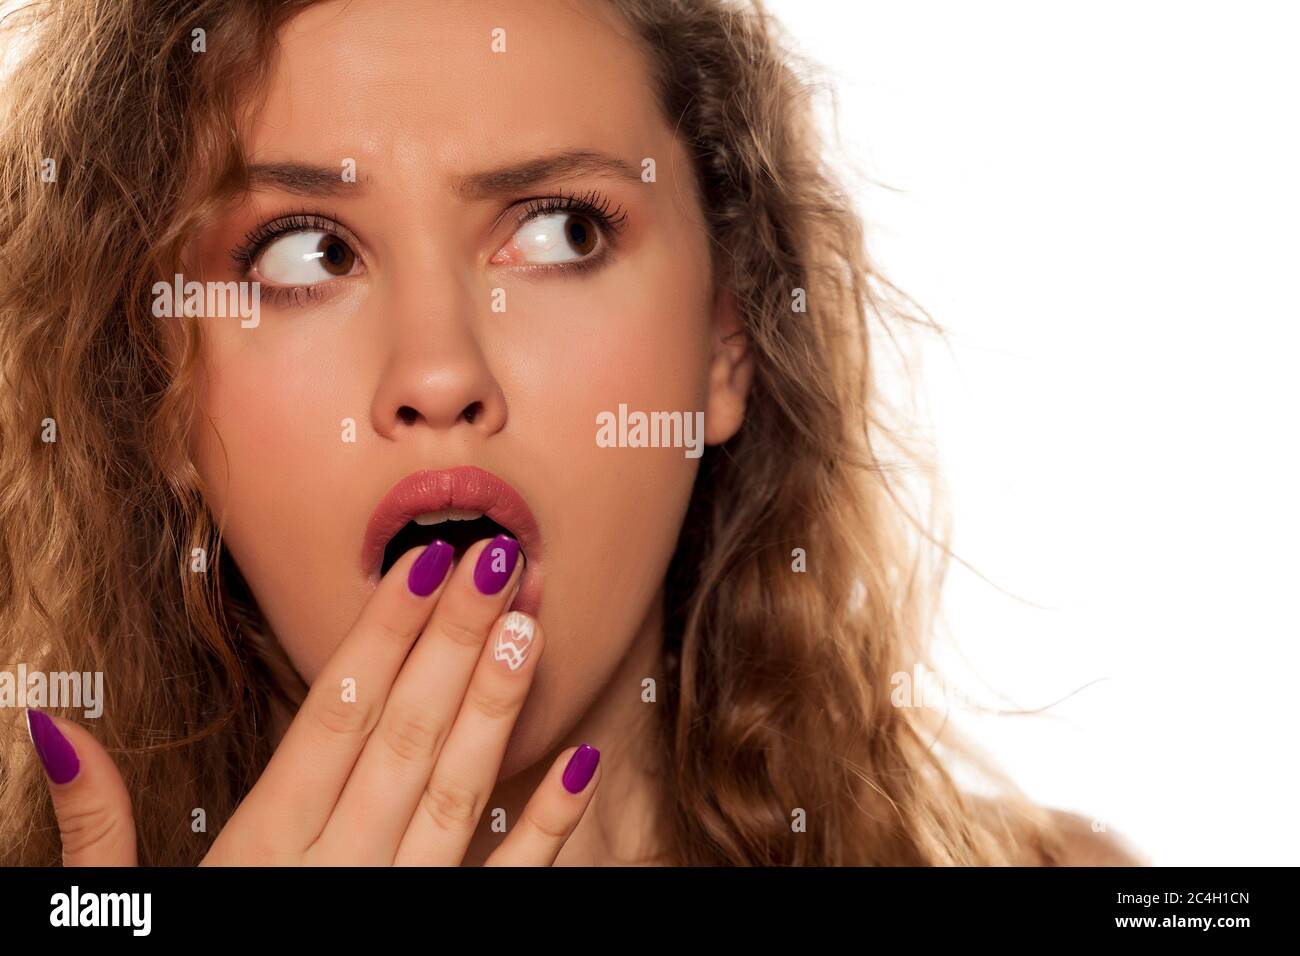 shocked young woman on white background Stock Photo